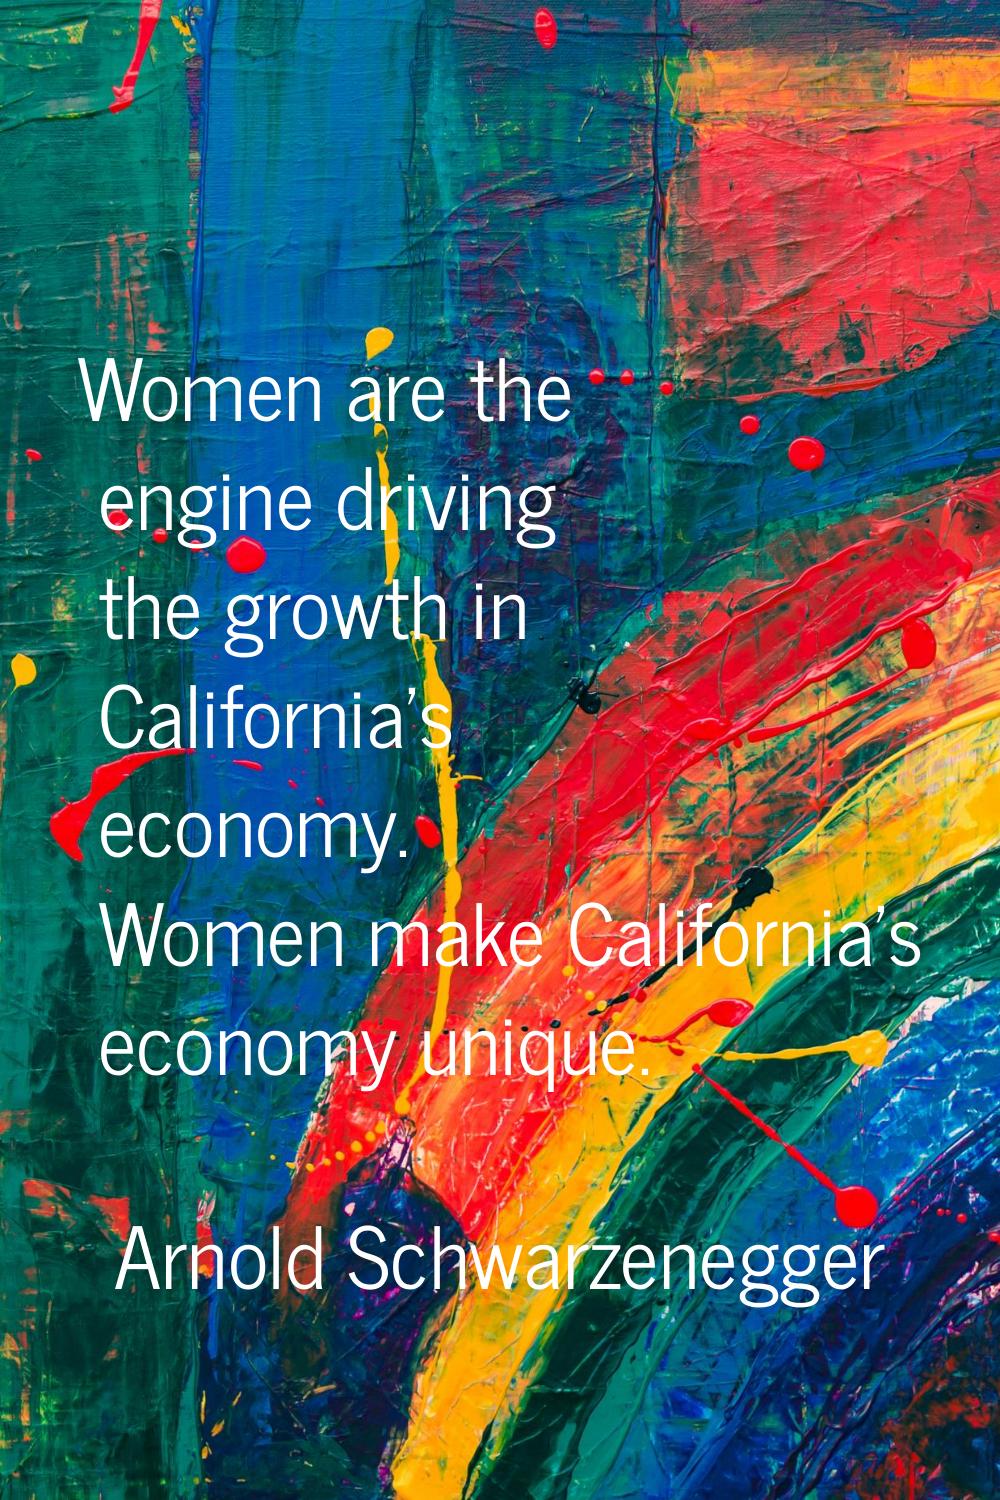 Women are the engine driving the growth in California's economy. Women make California's economy un